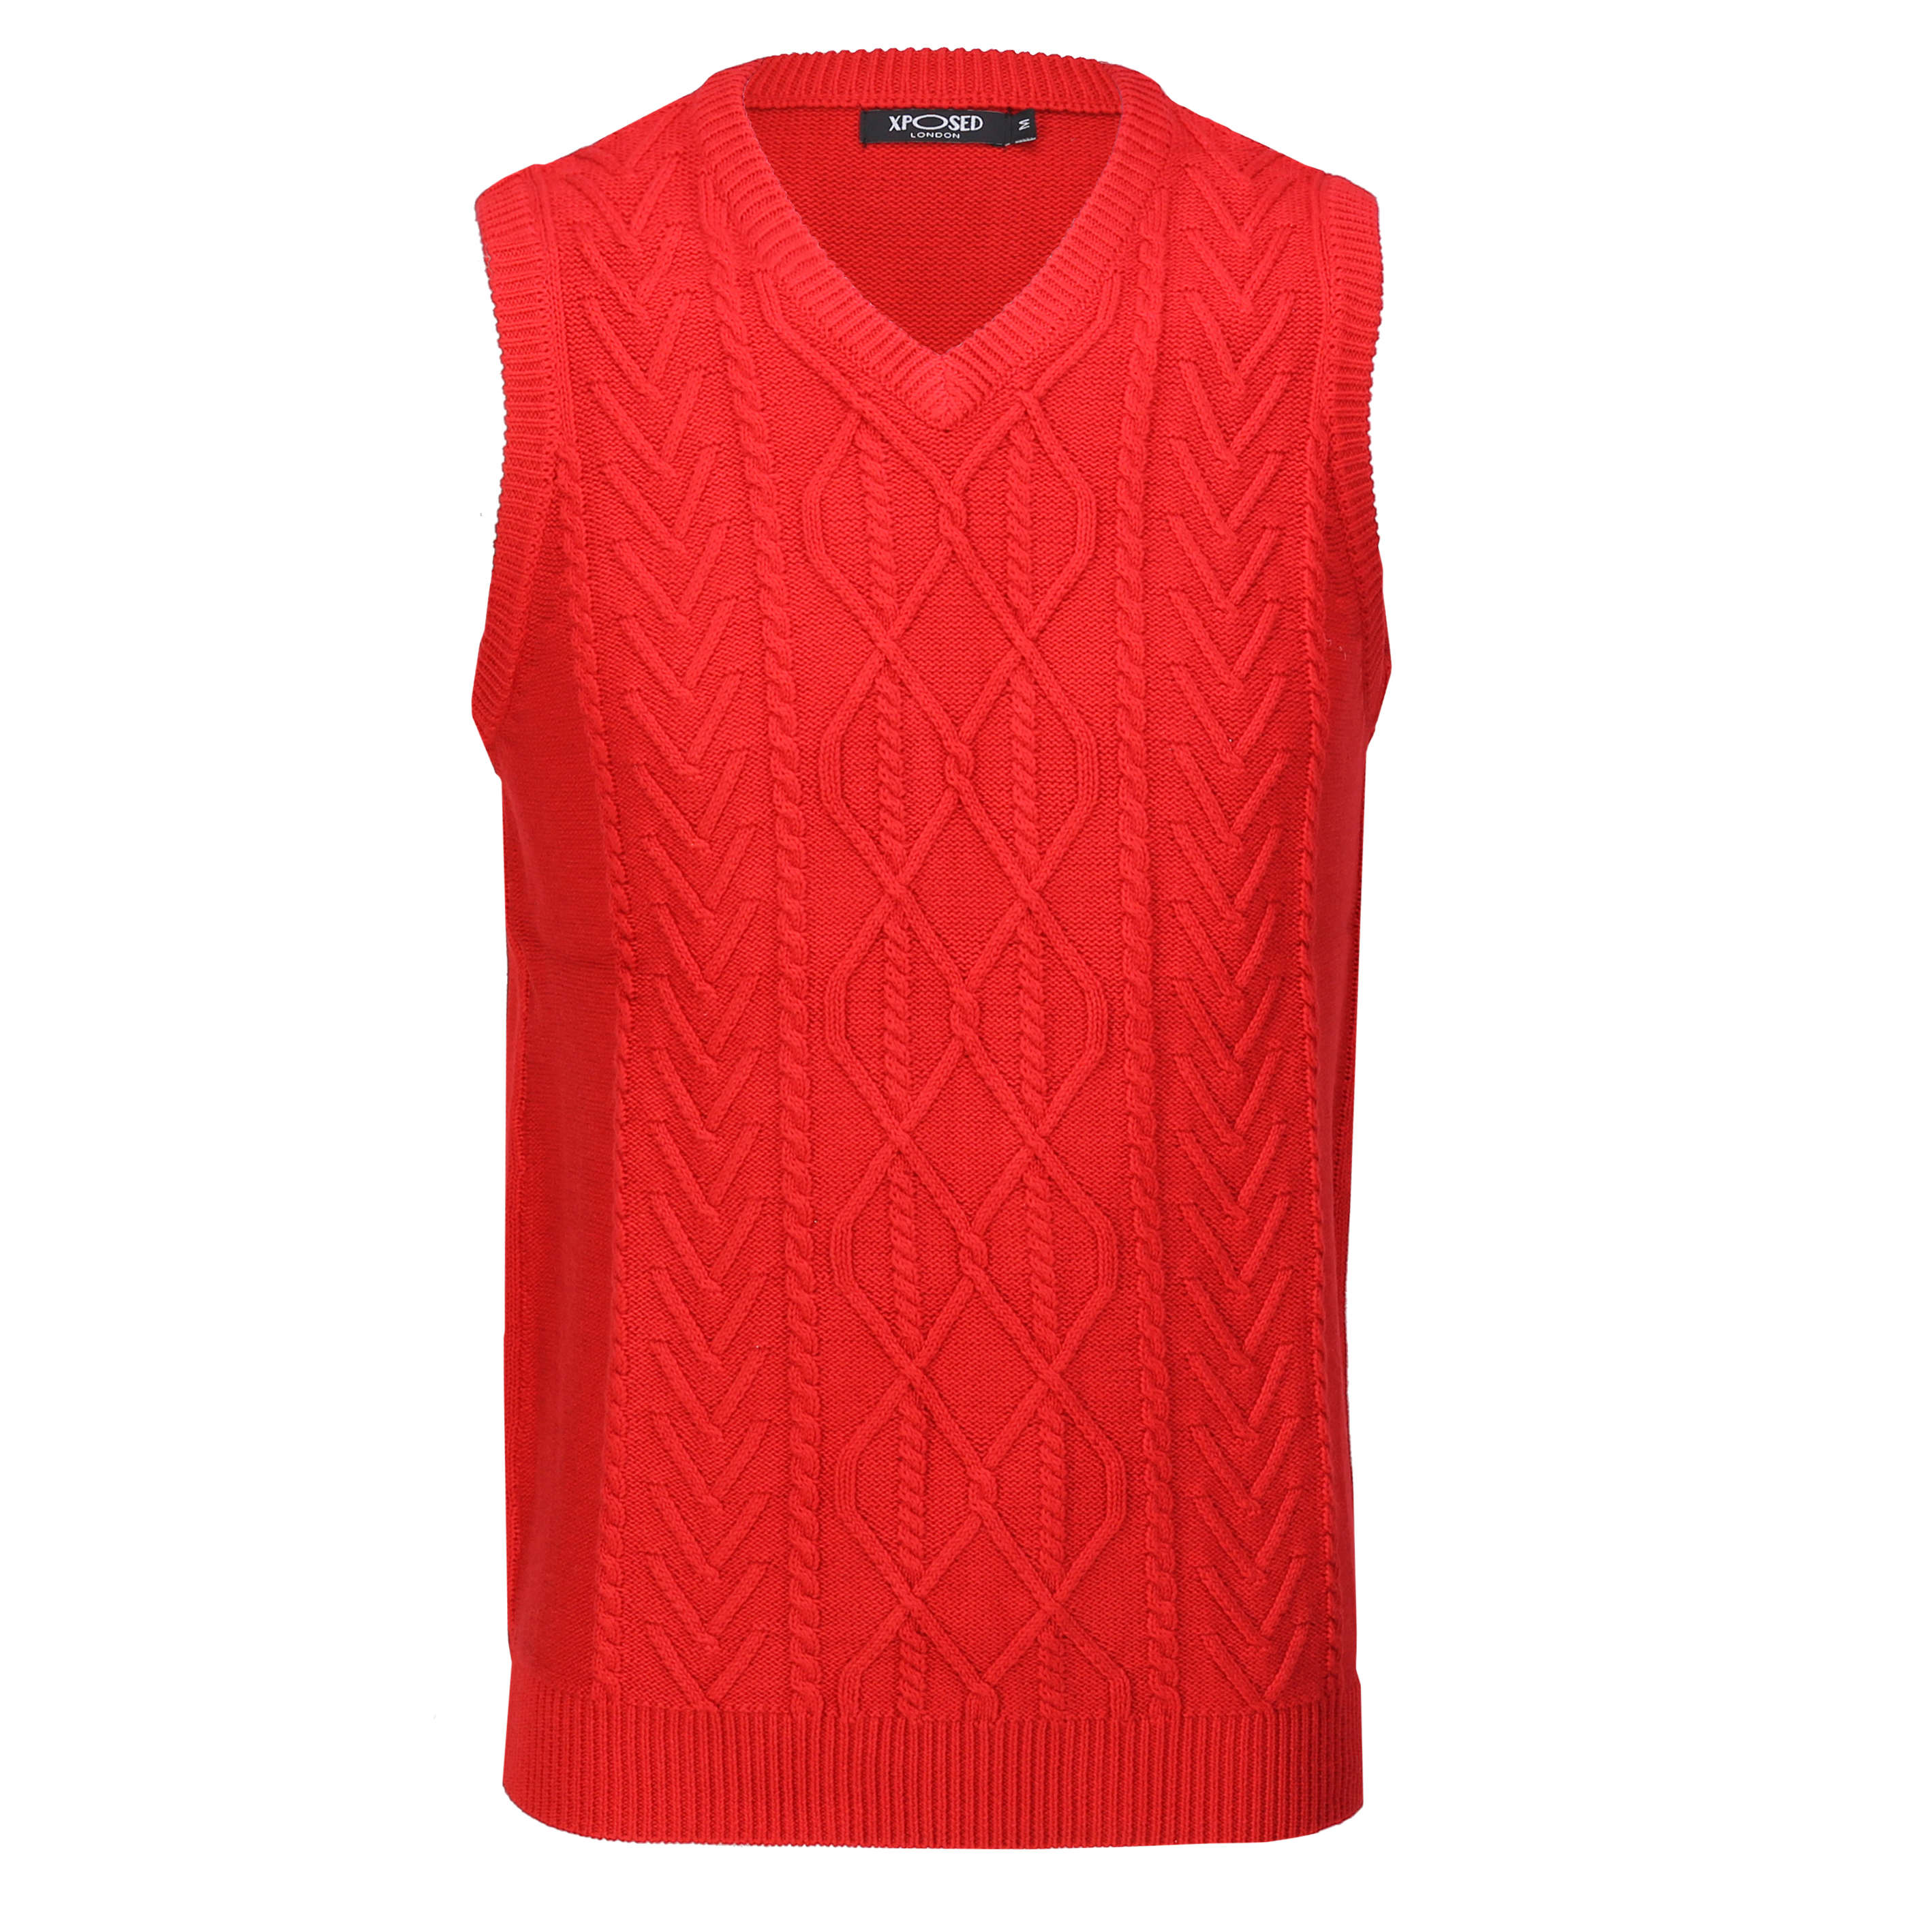 Classic Sleeveless V Neck Red Jumper Cable Knitted